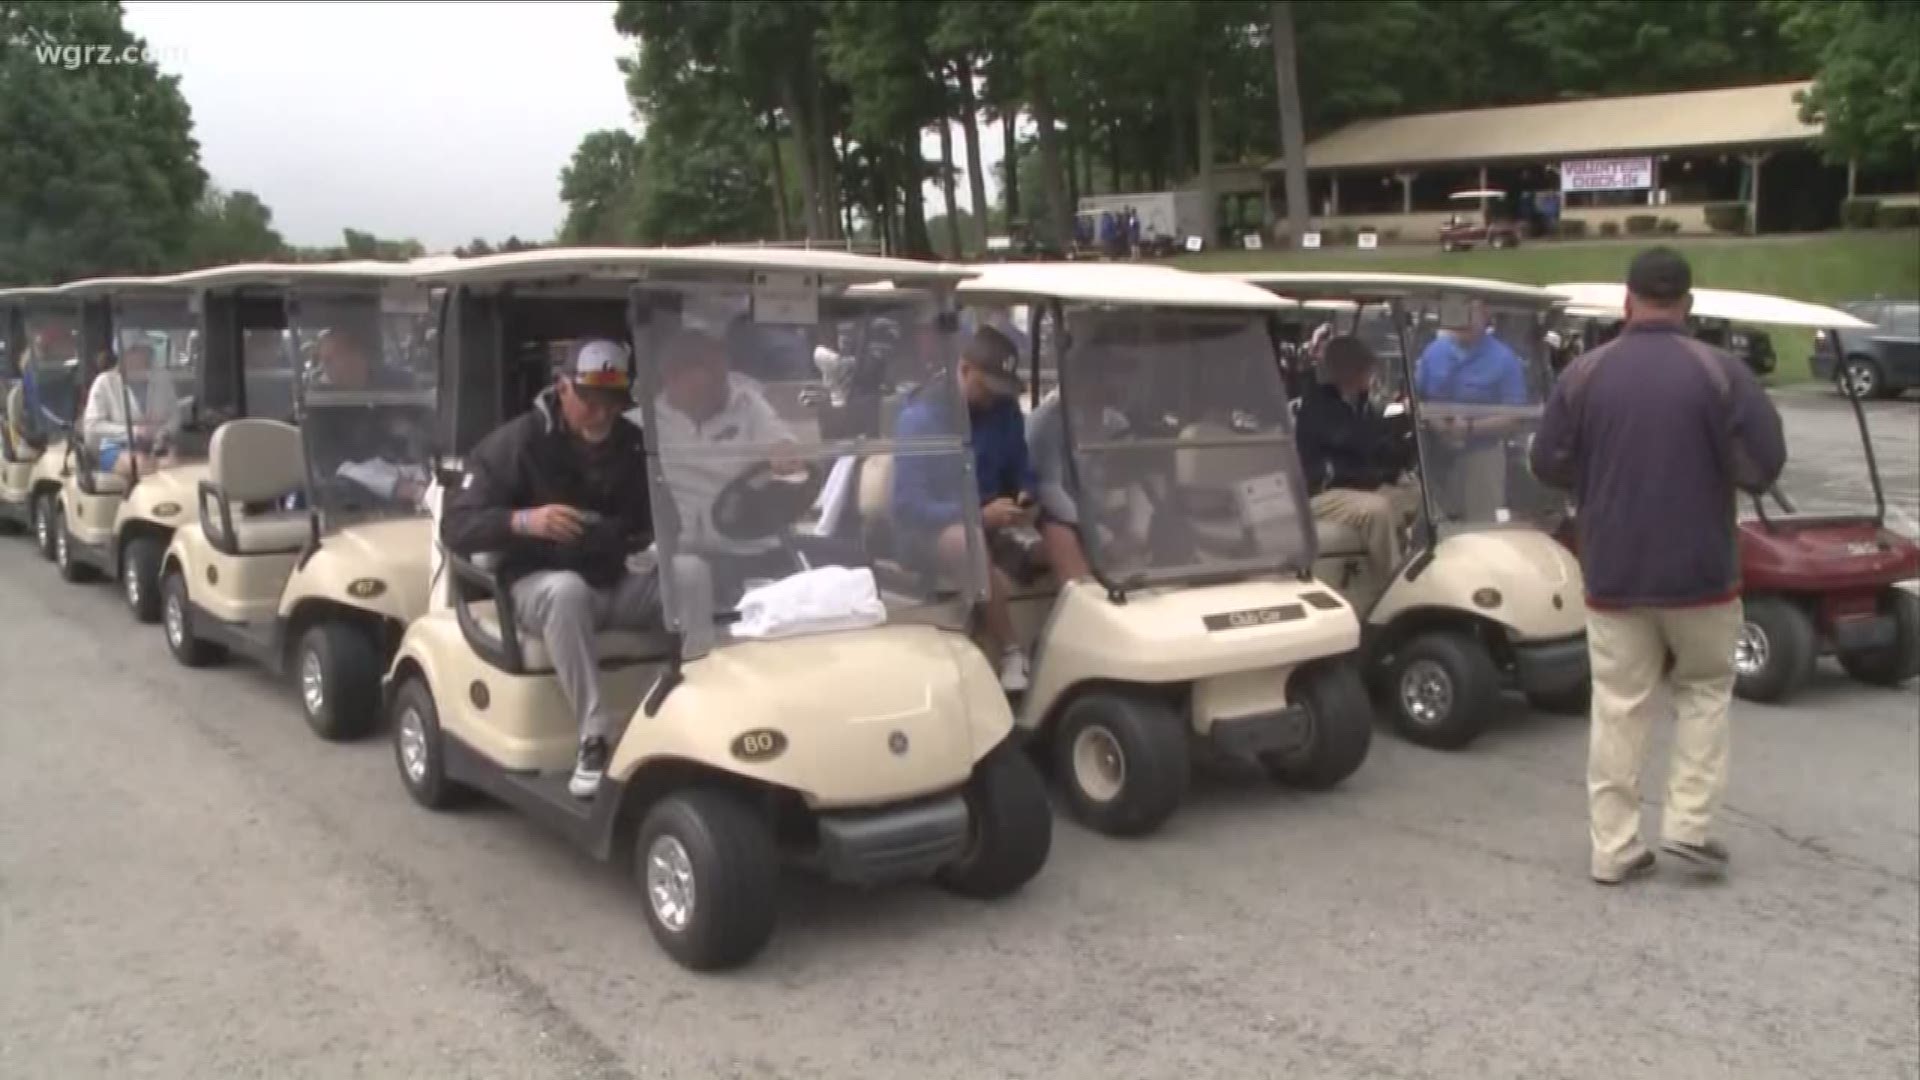 The 32nd annual Jim Kelly Celebrity Golf Classic raises money for the Jim Kelly Foundation